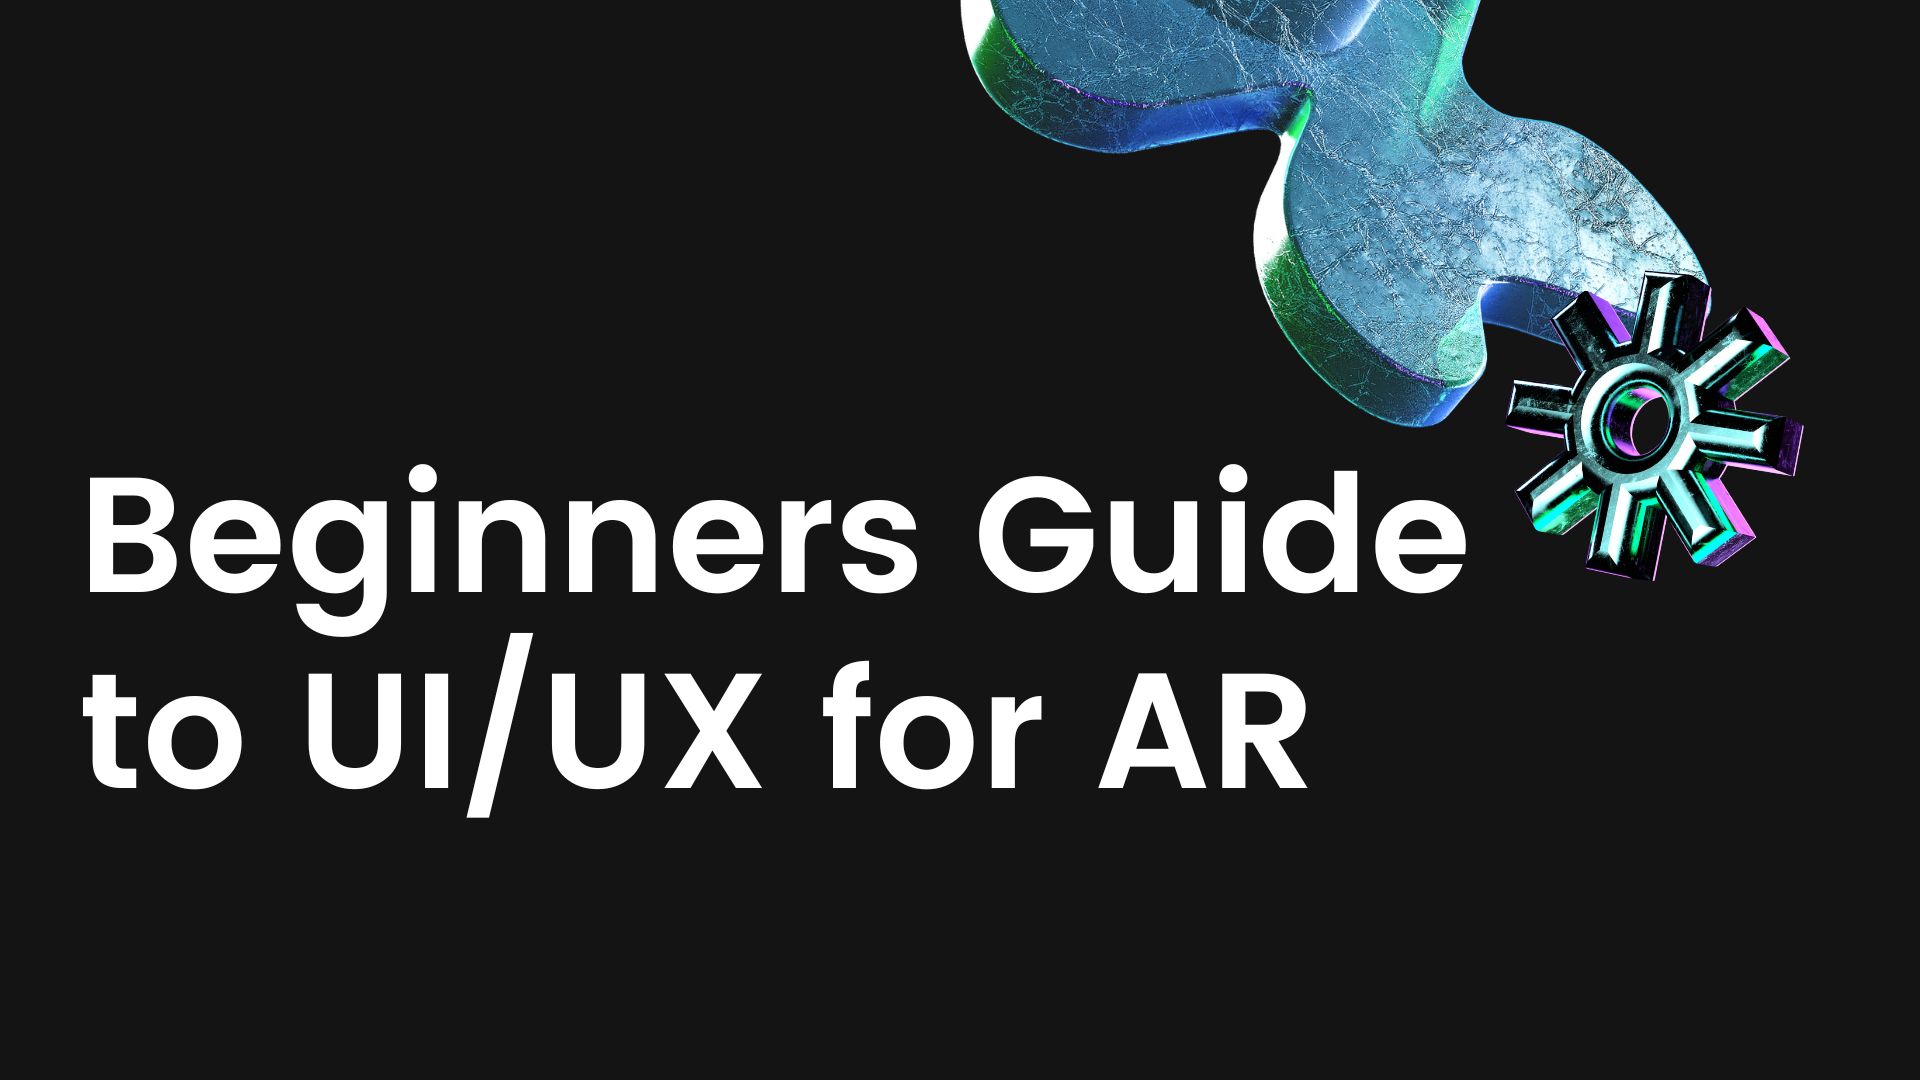 Beginners Guide to UI/UX for Augmented Reality